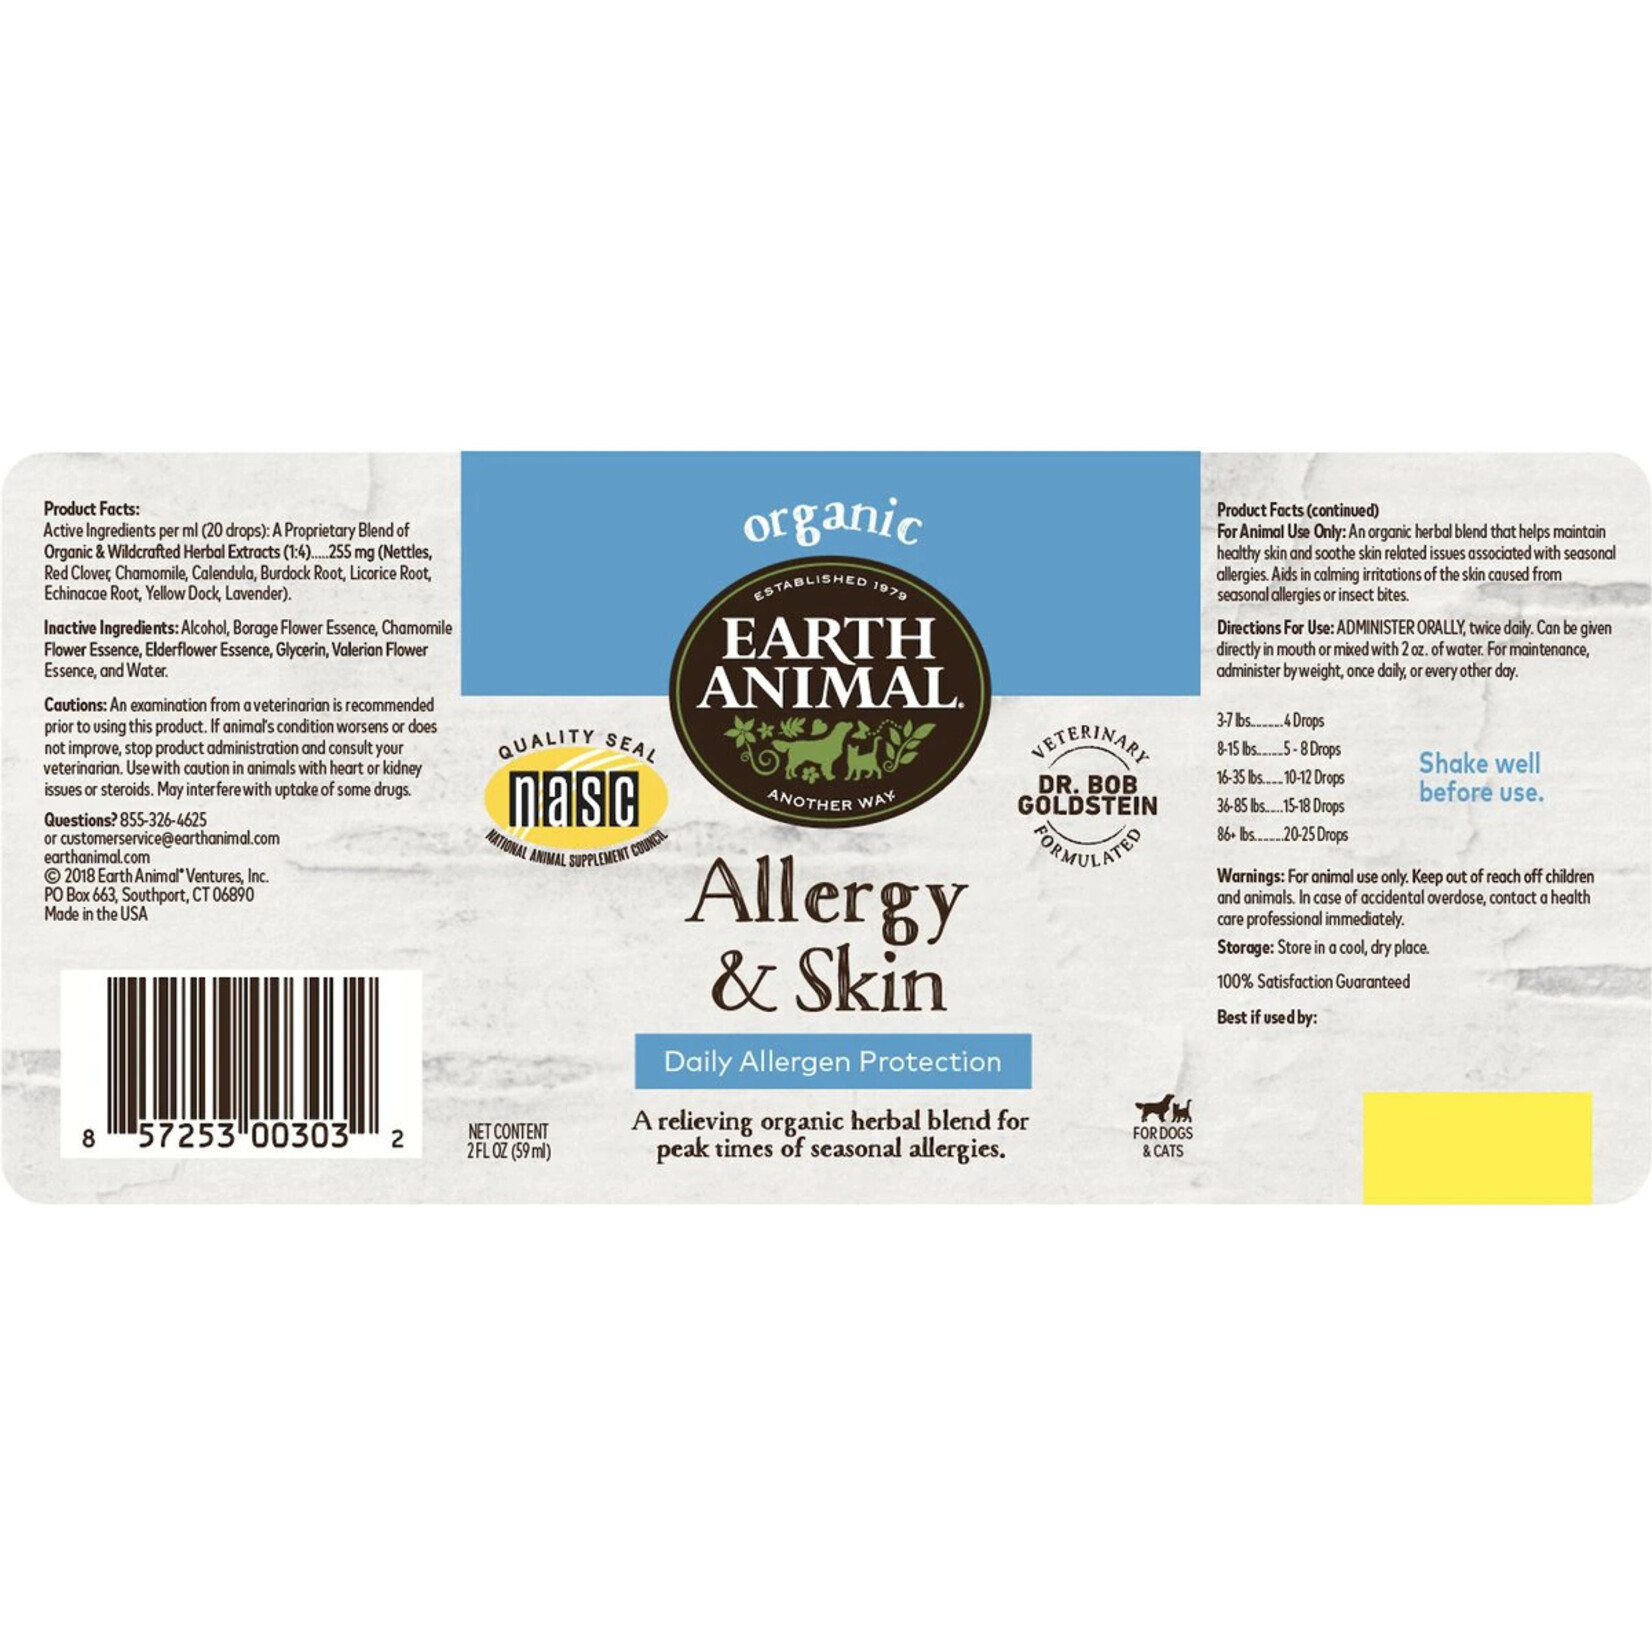 Earth Animal Earth Animal Allergy & Skin Daily Allergen Protection